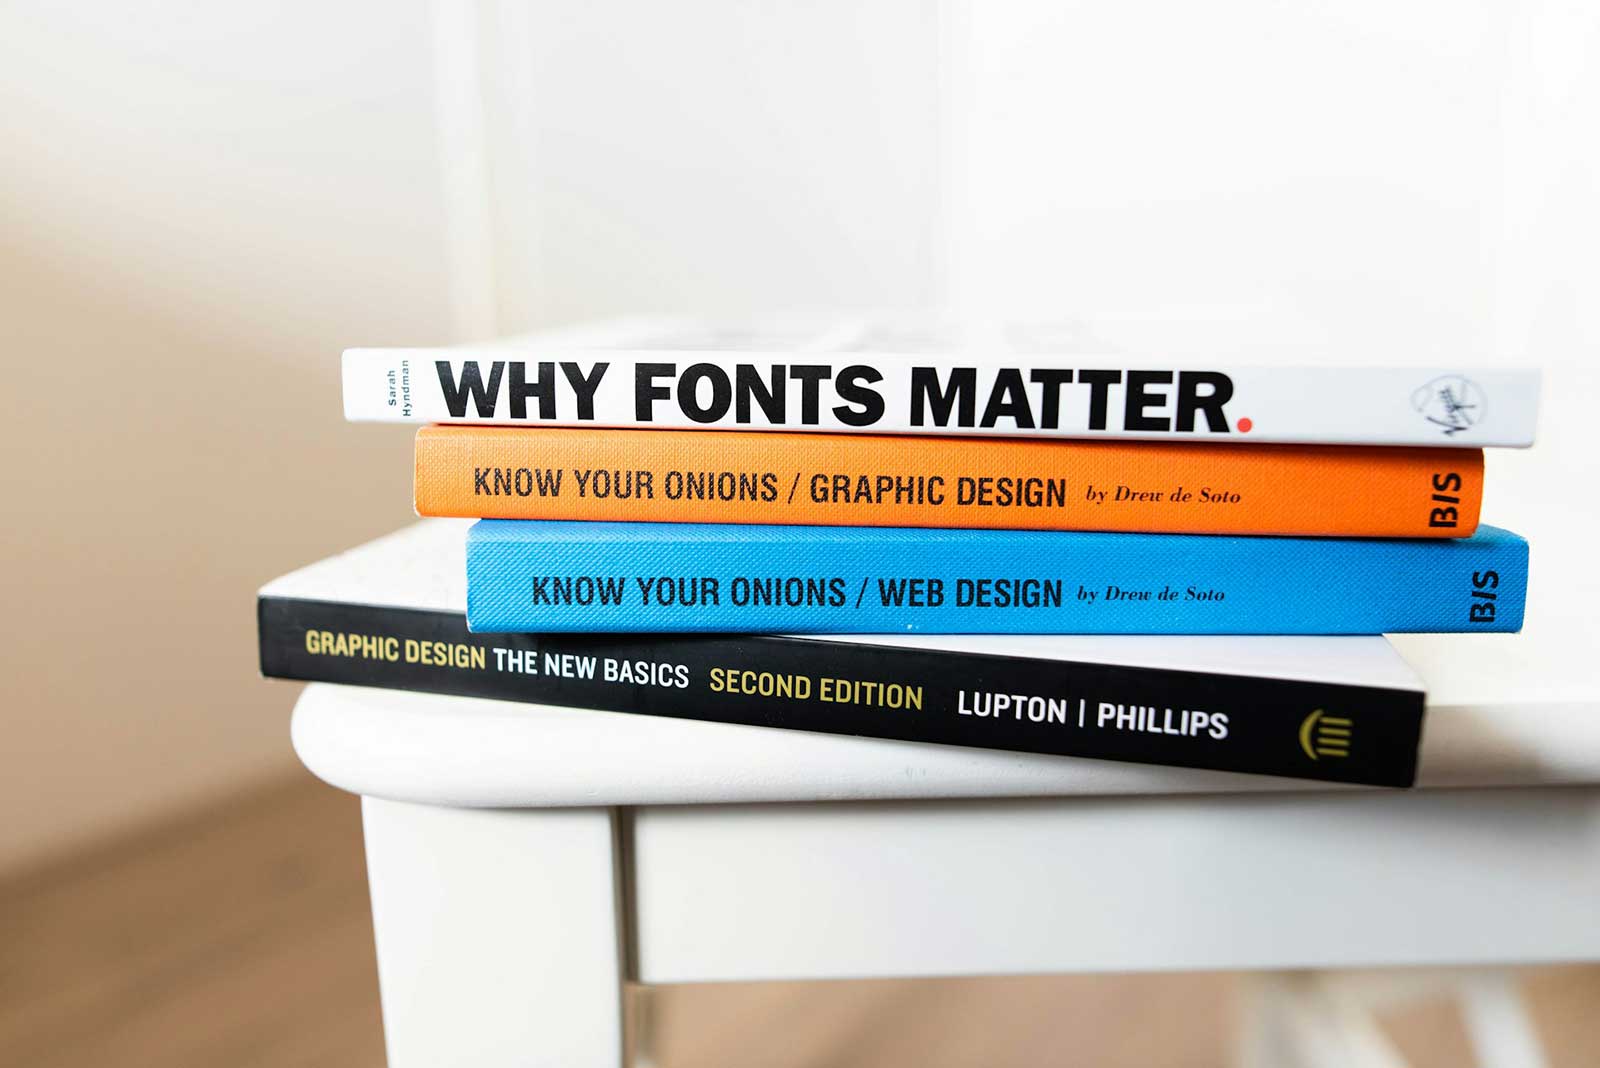 Stack of books about Graphic Design on small end table.